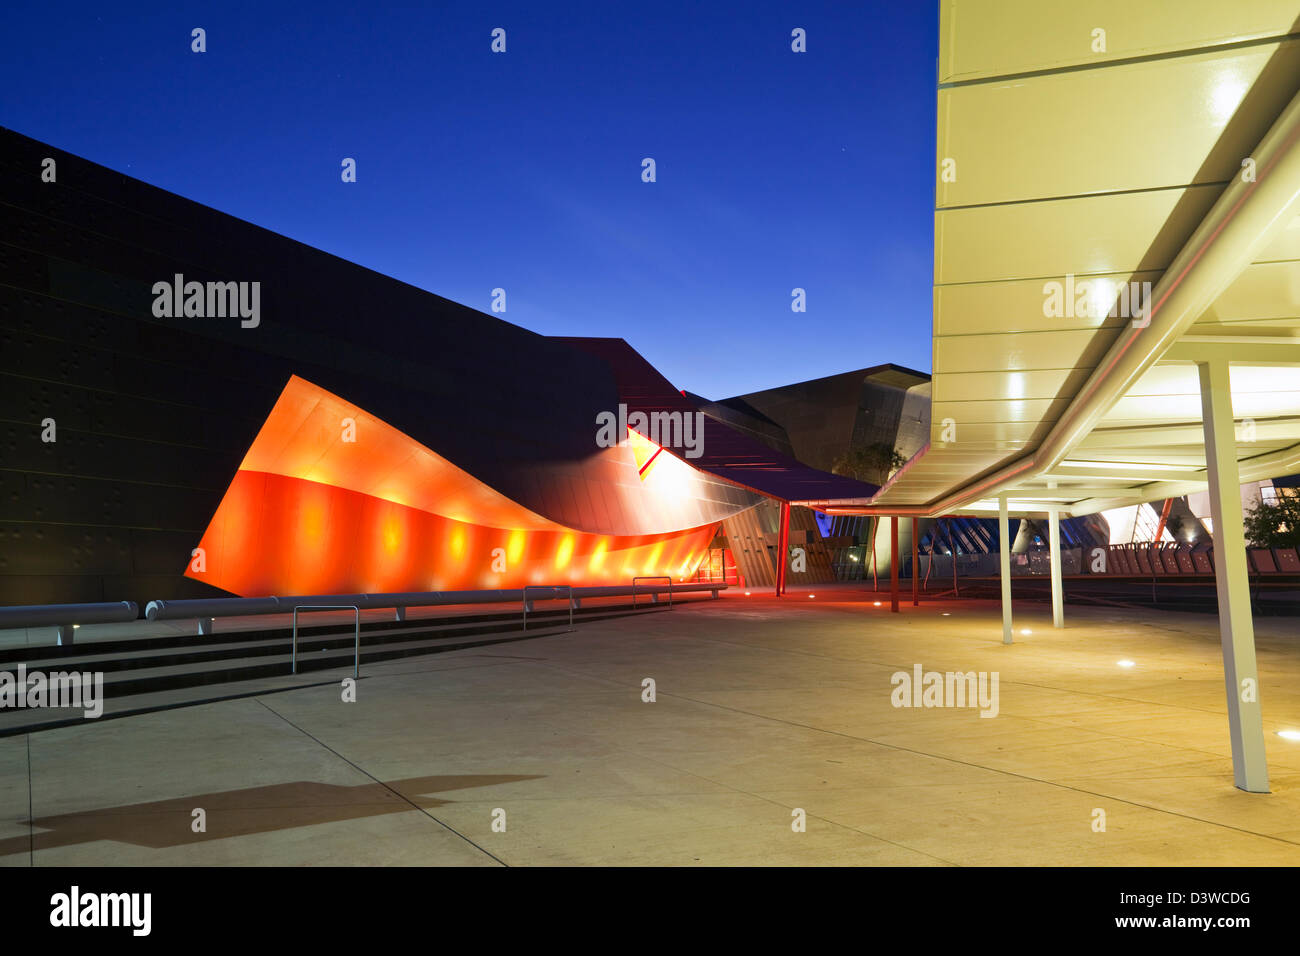 Architecture of the entrance to National Museum of Australia. Canberra, Australian Capital Territory (ACT), Australia Stock Photo